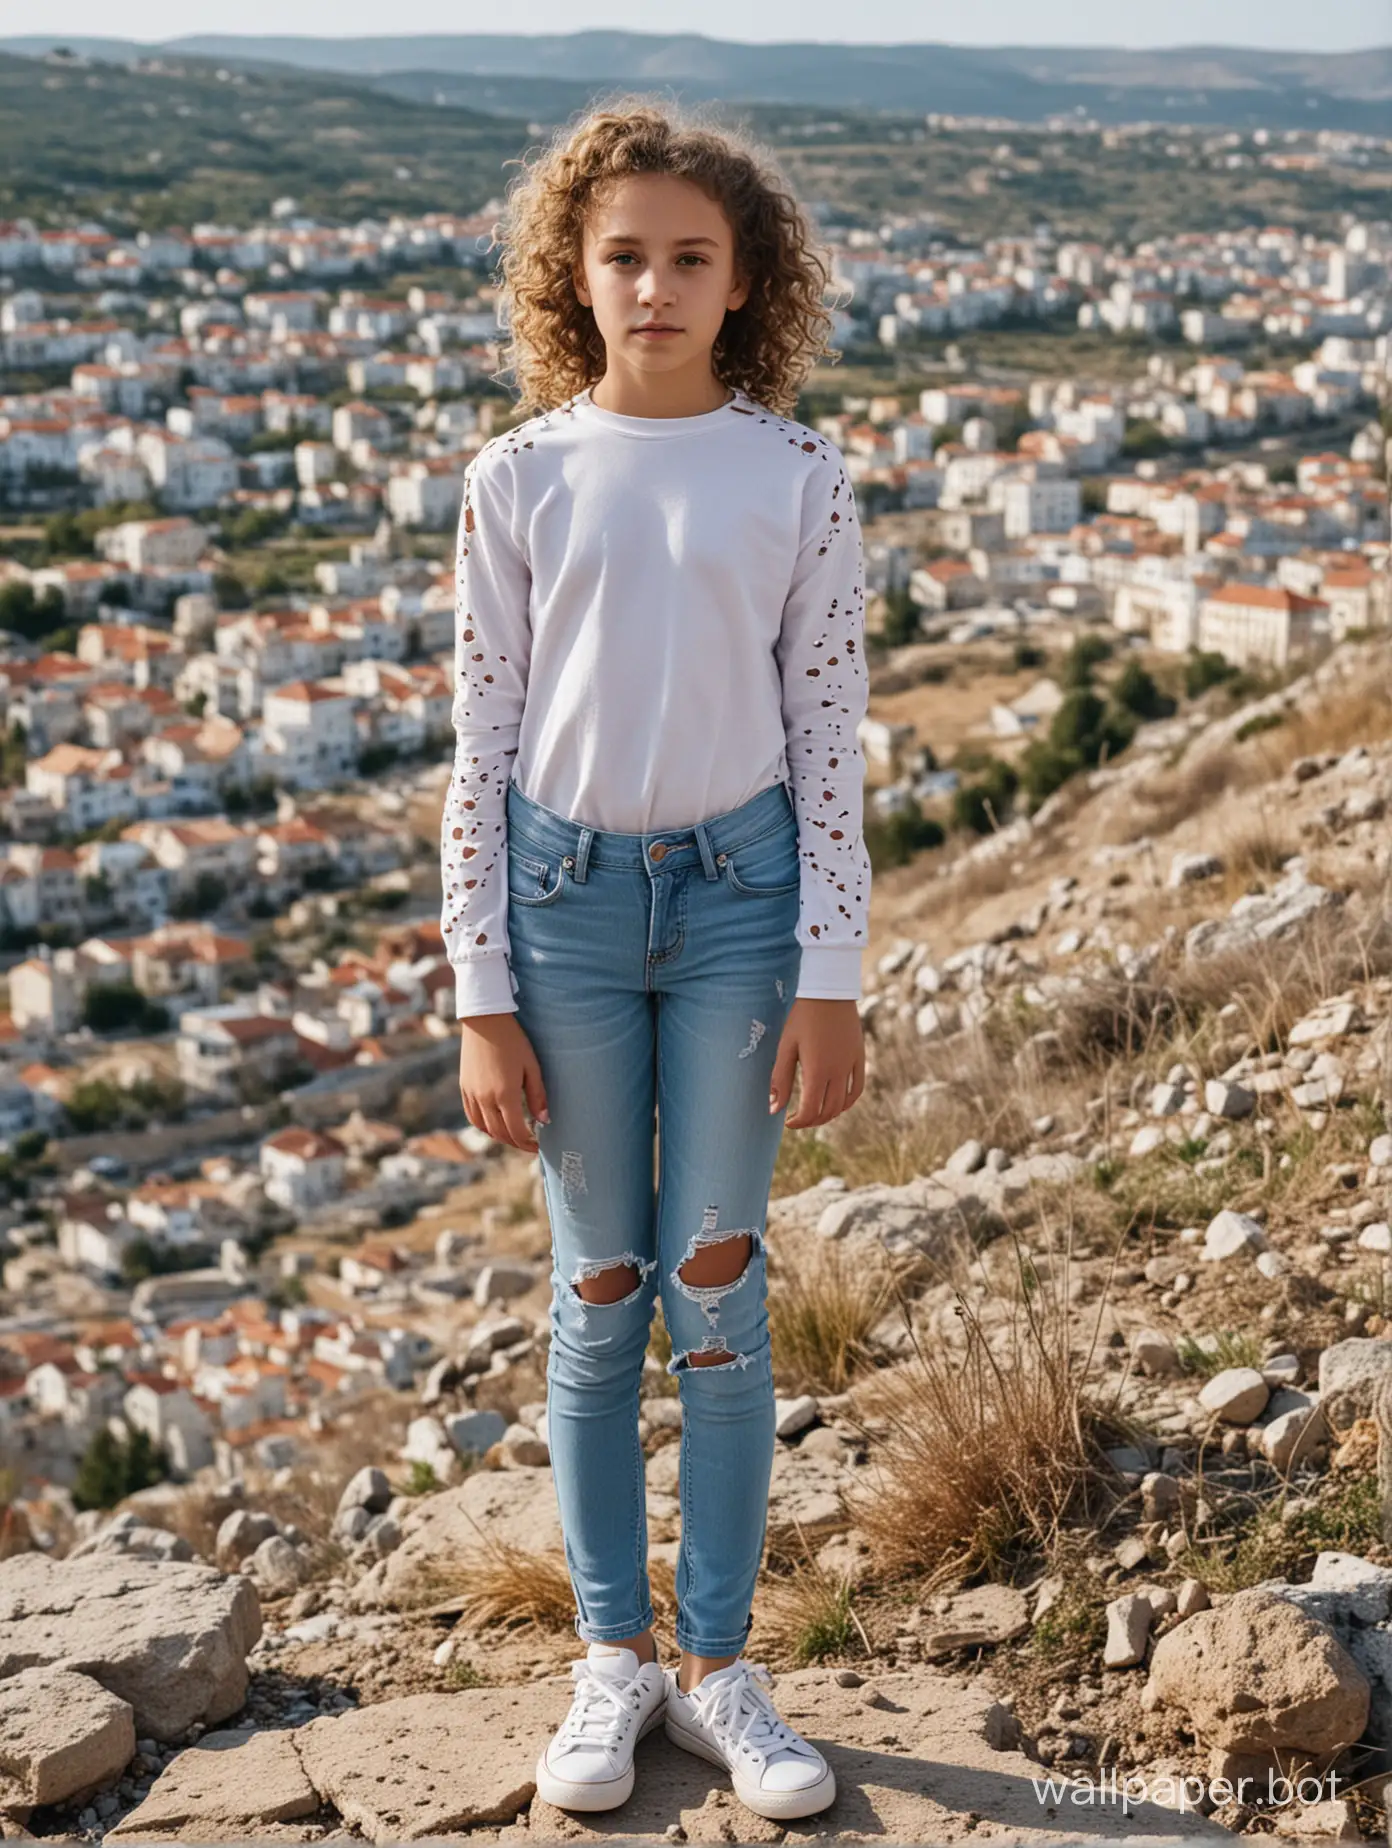 CurlyHaired-11YearOld-Girl-in-Distressed-Jeans-Overlooking-Quaint-Crimean-Town